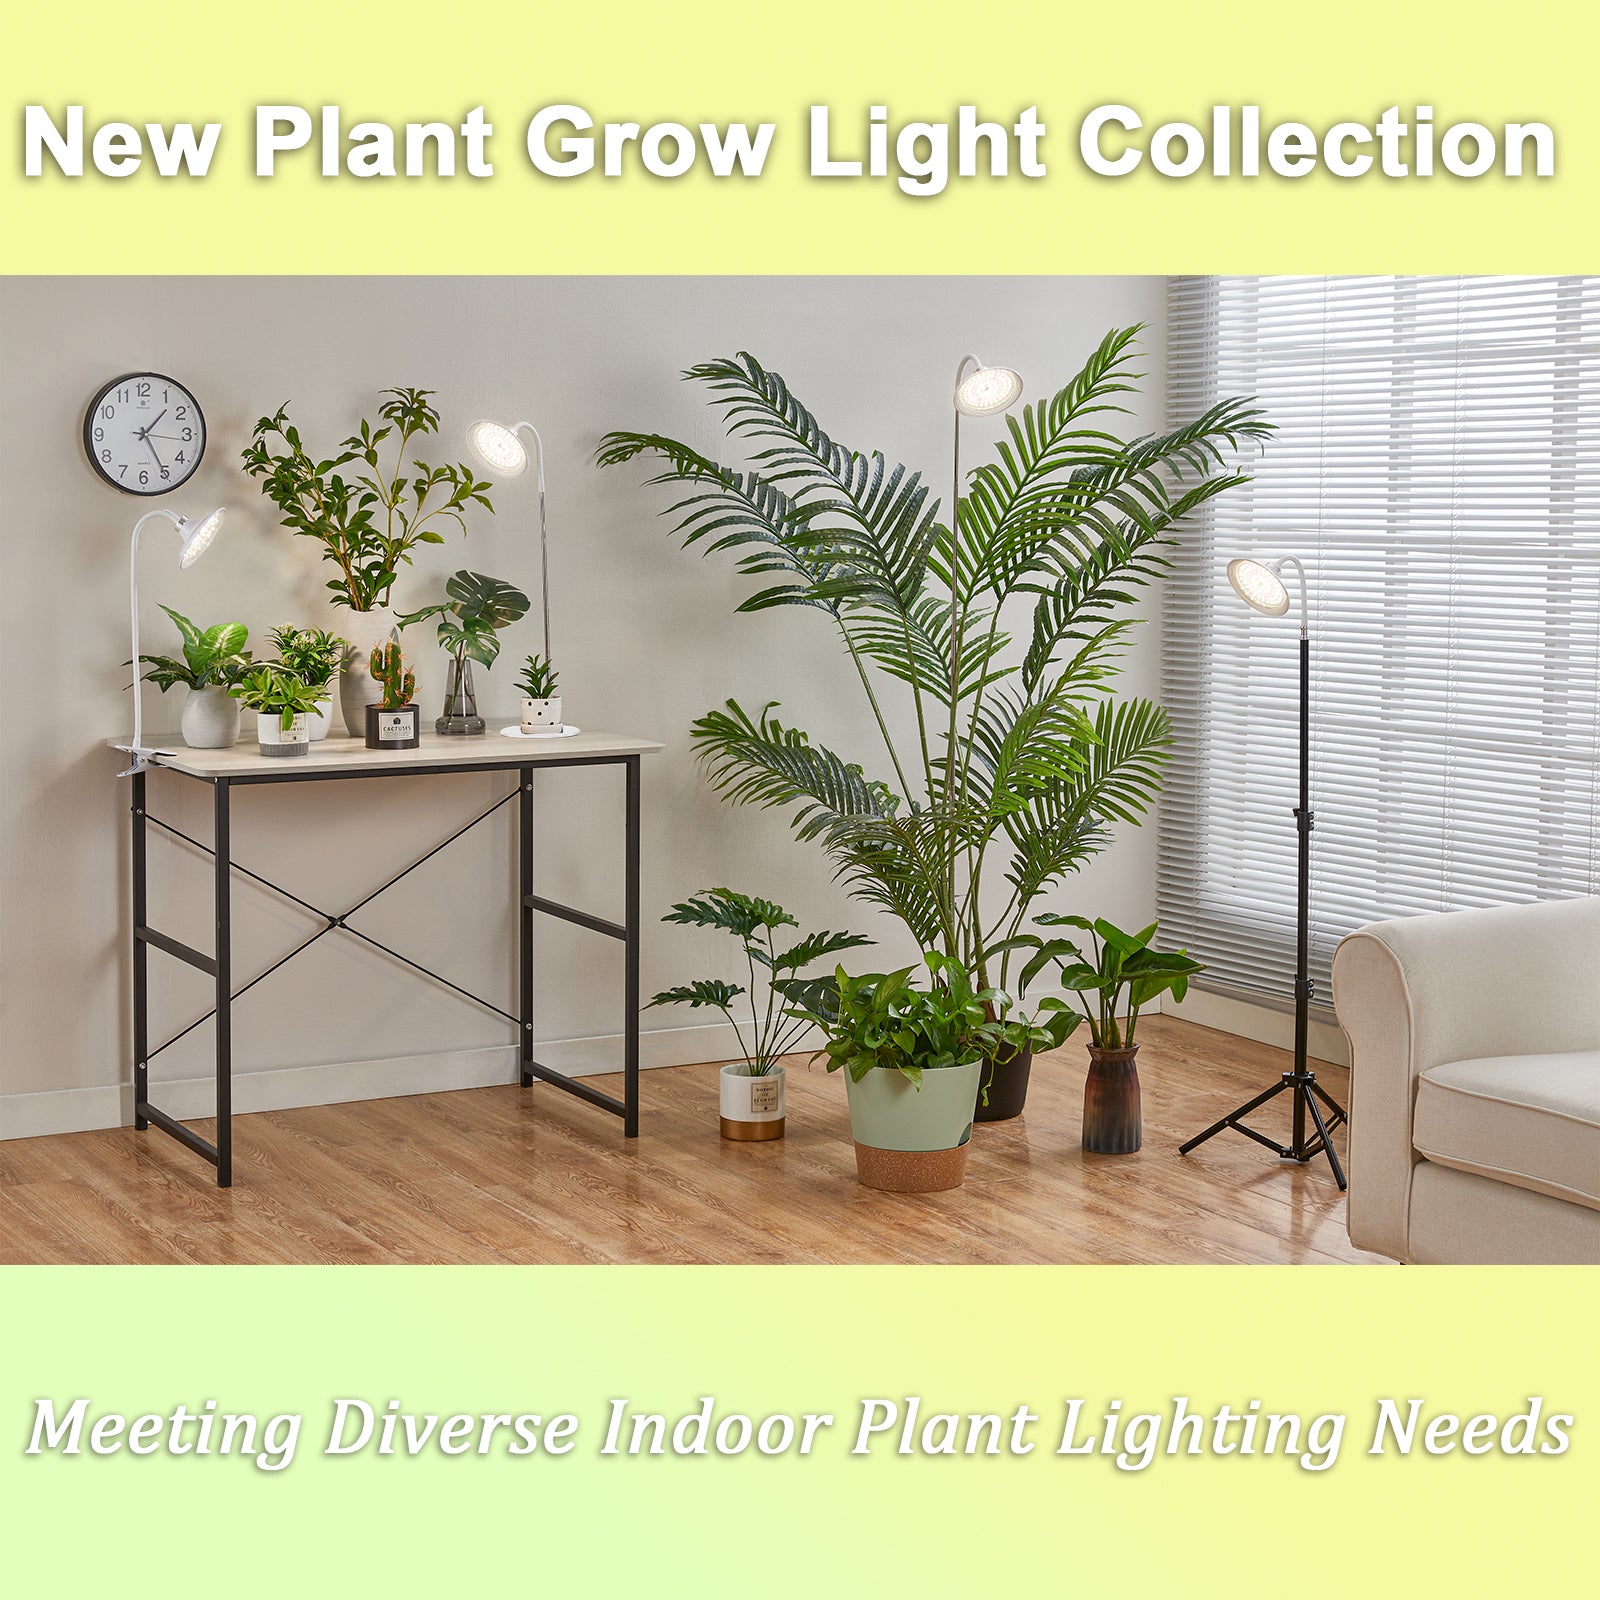 Introducing Our New Line of Multi-Style LED Grow Lights